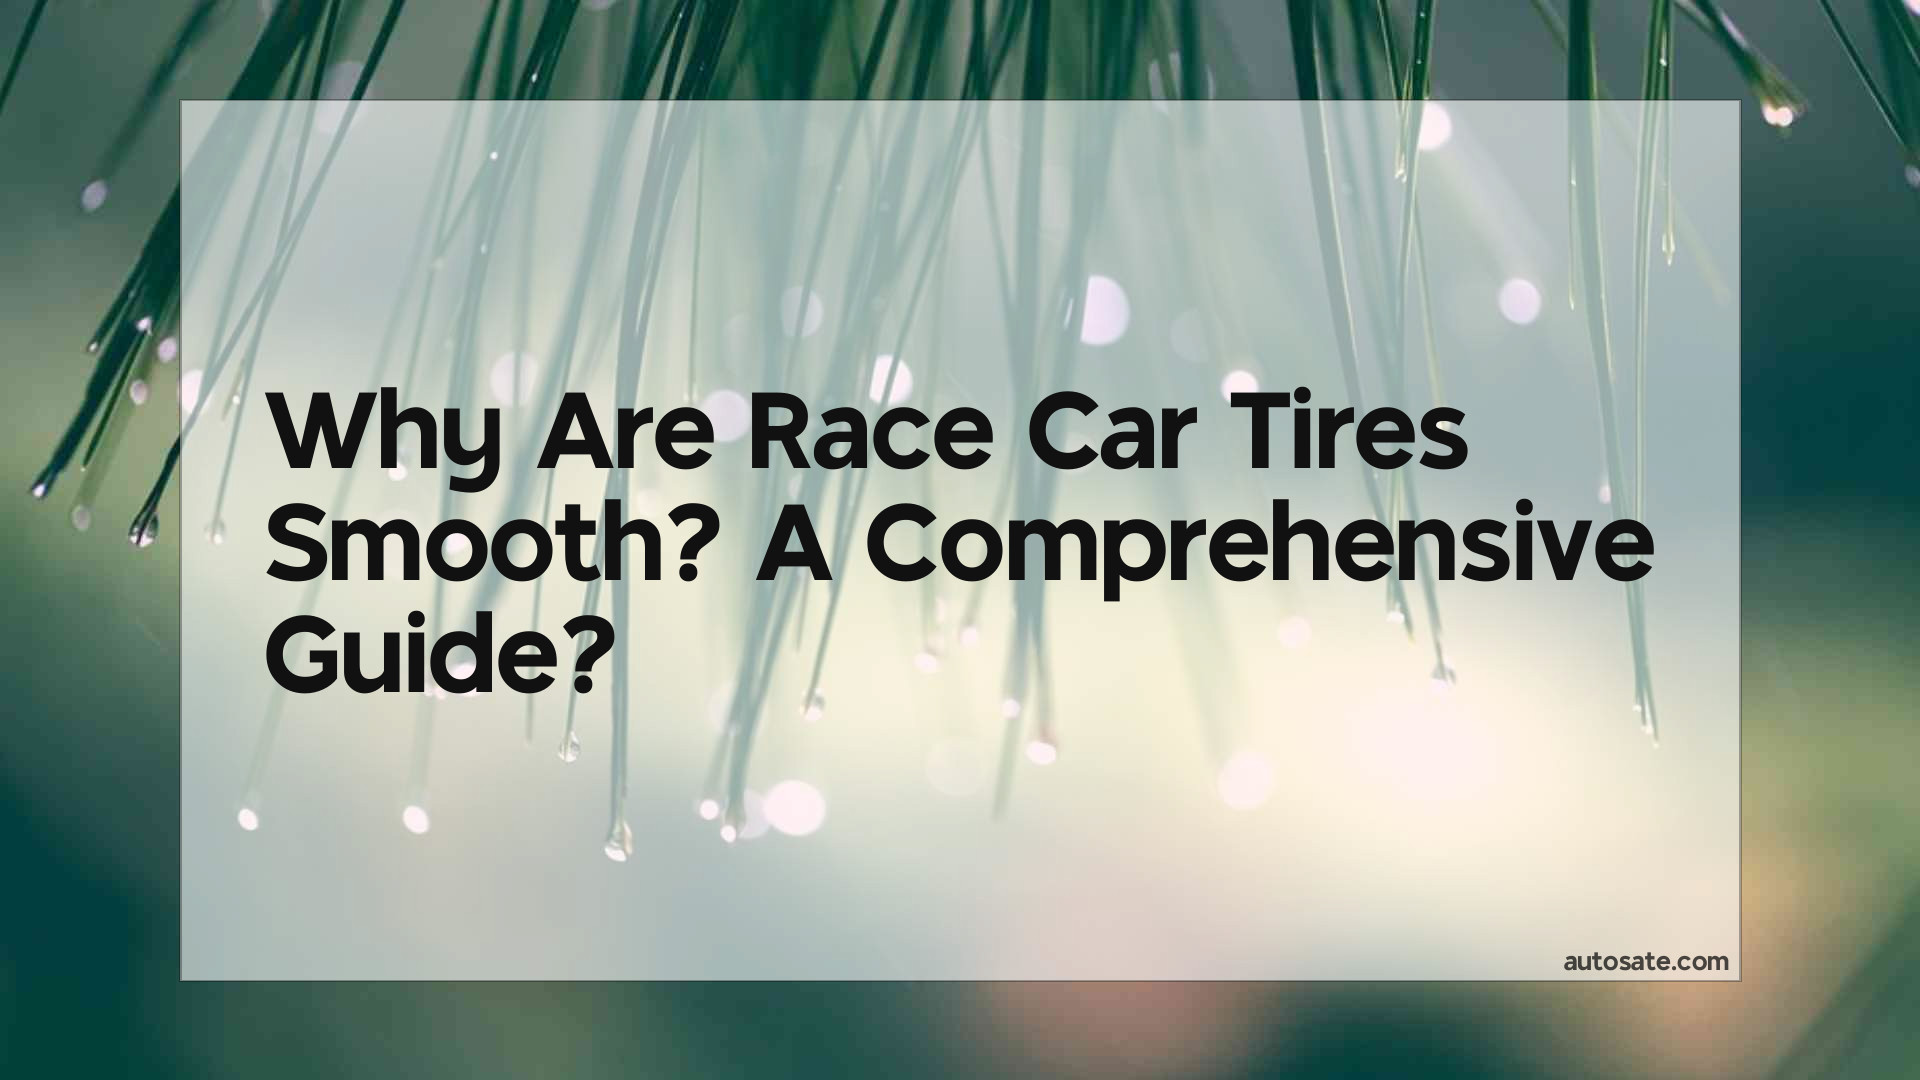 Why Are Race Car Tires Smooth? A Comprehensive Guide